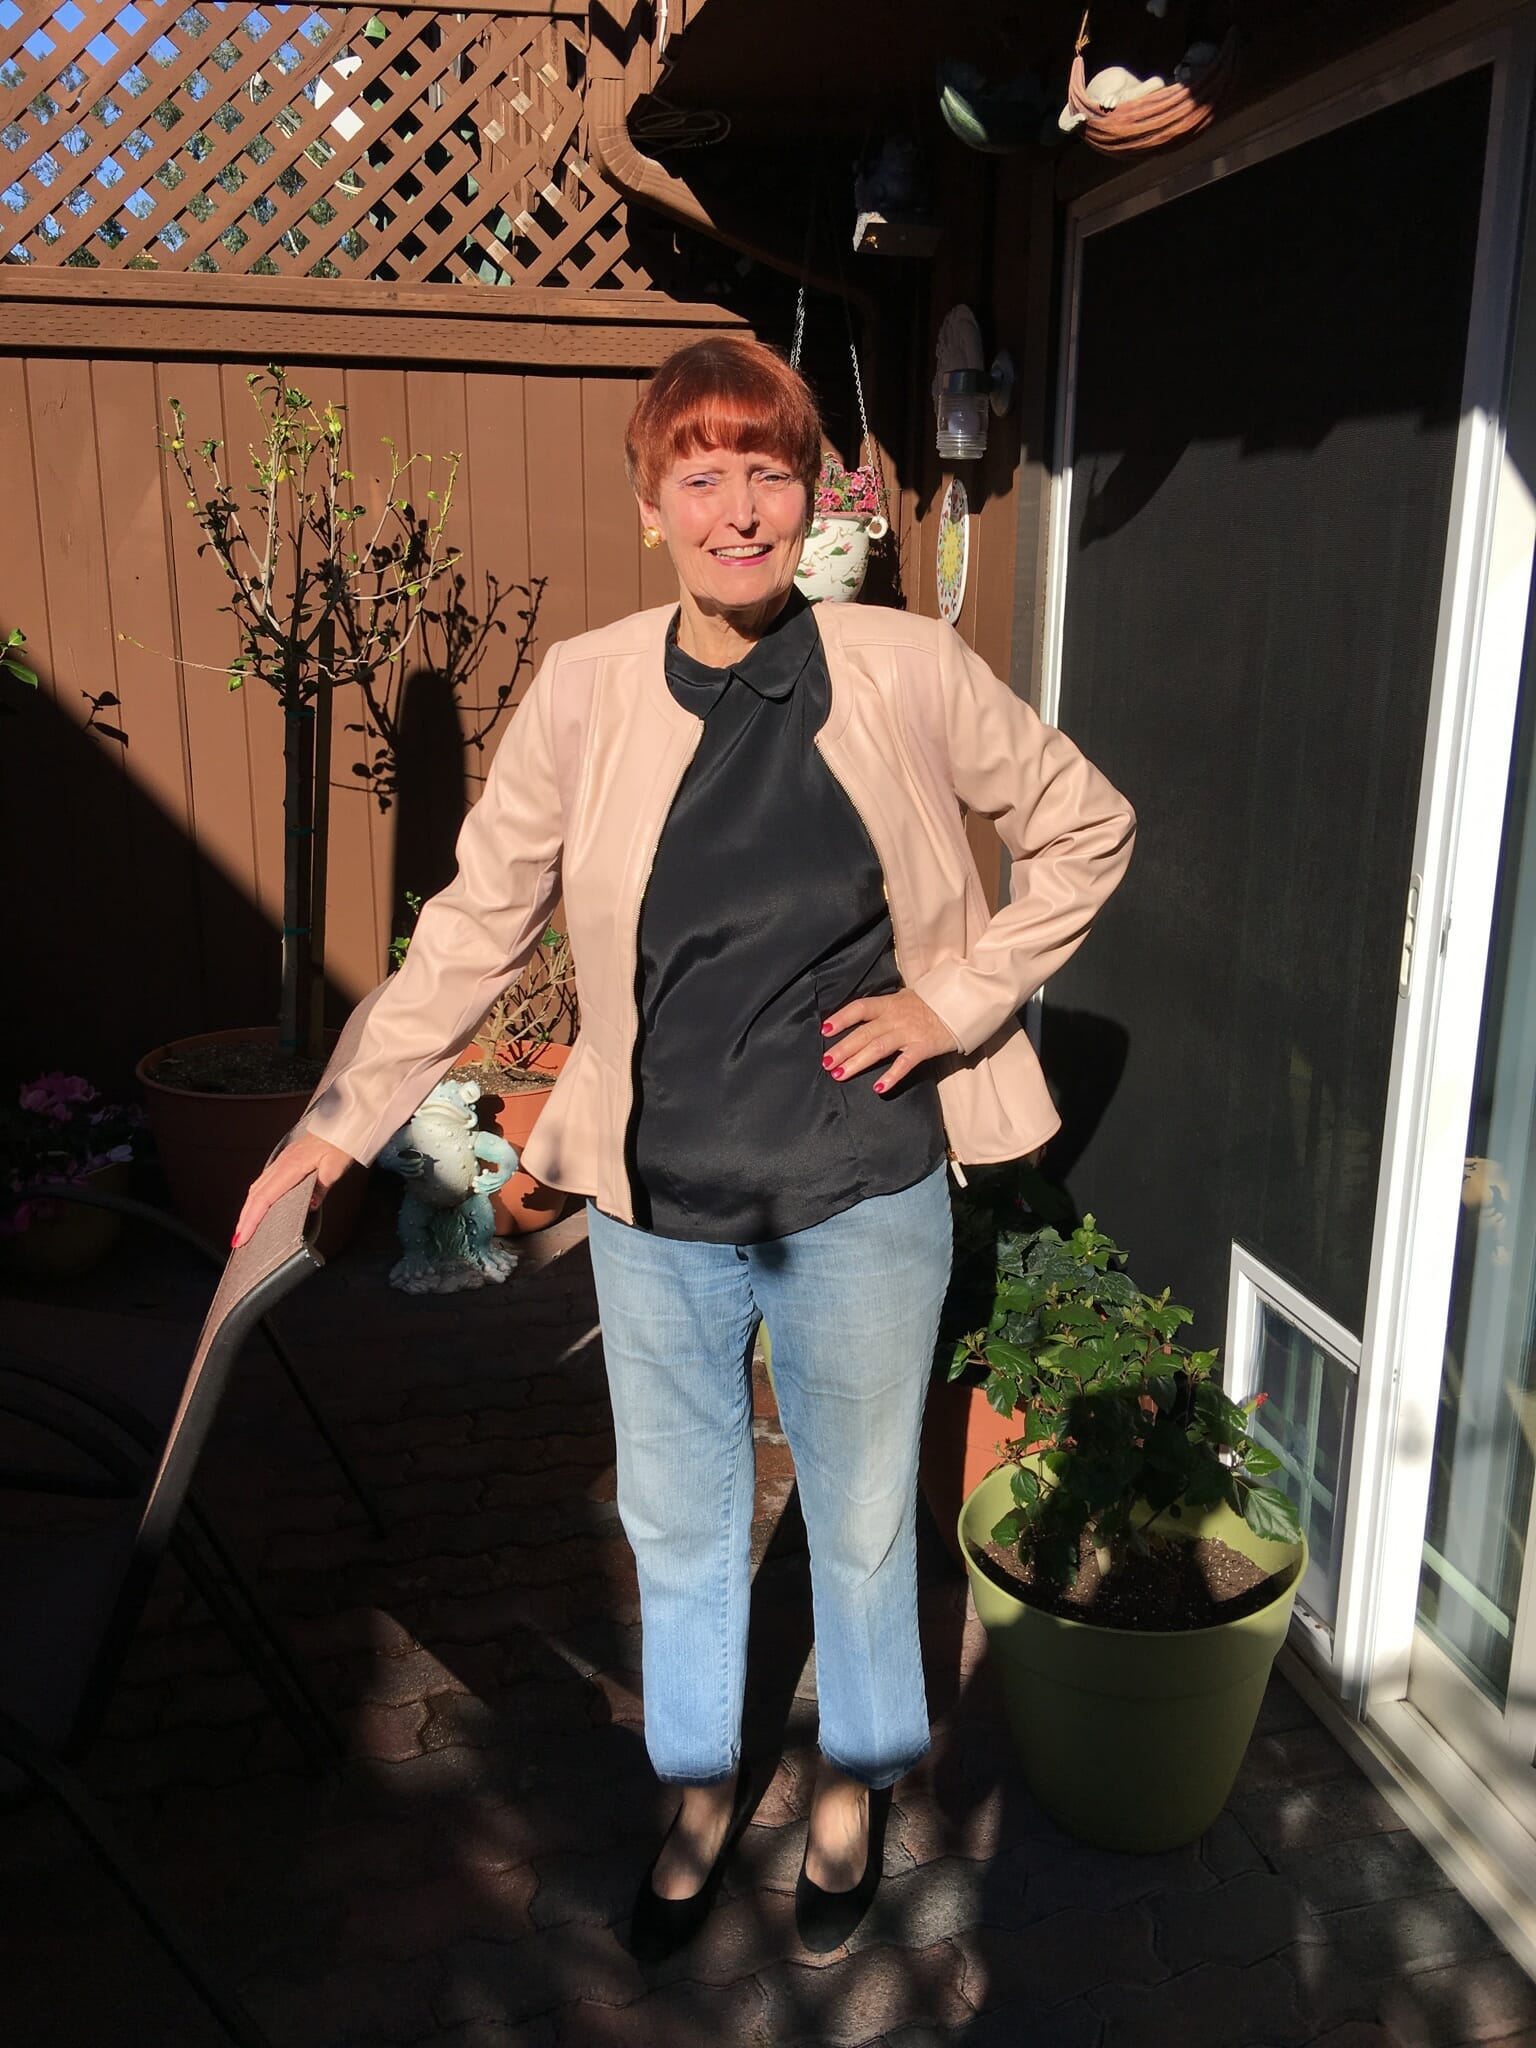 A smiling Midnight Velvet customer by a patio garden, in a blush peplum jacket, gray top, denim jeans and black pumps.